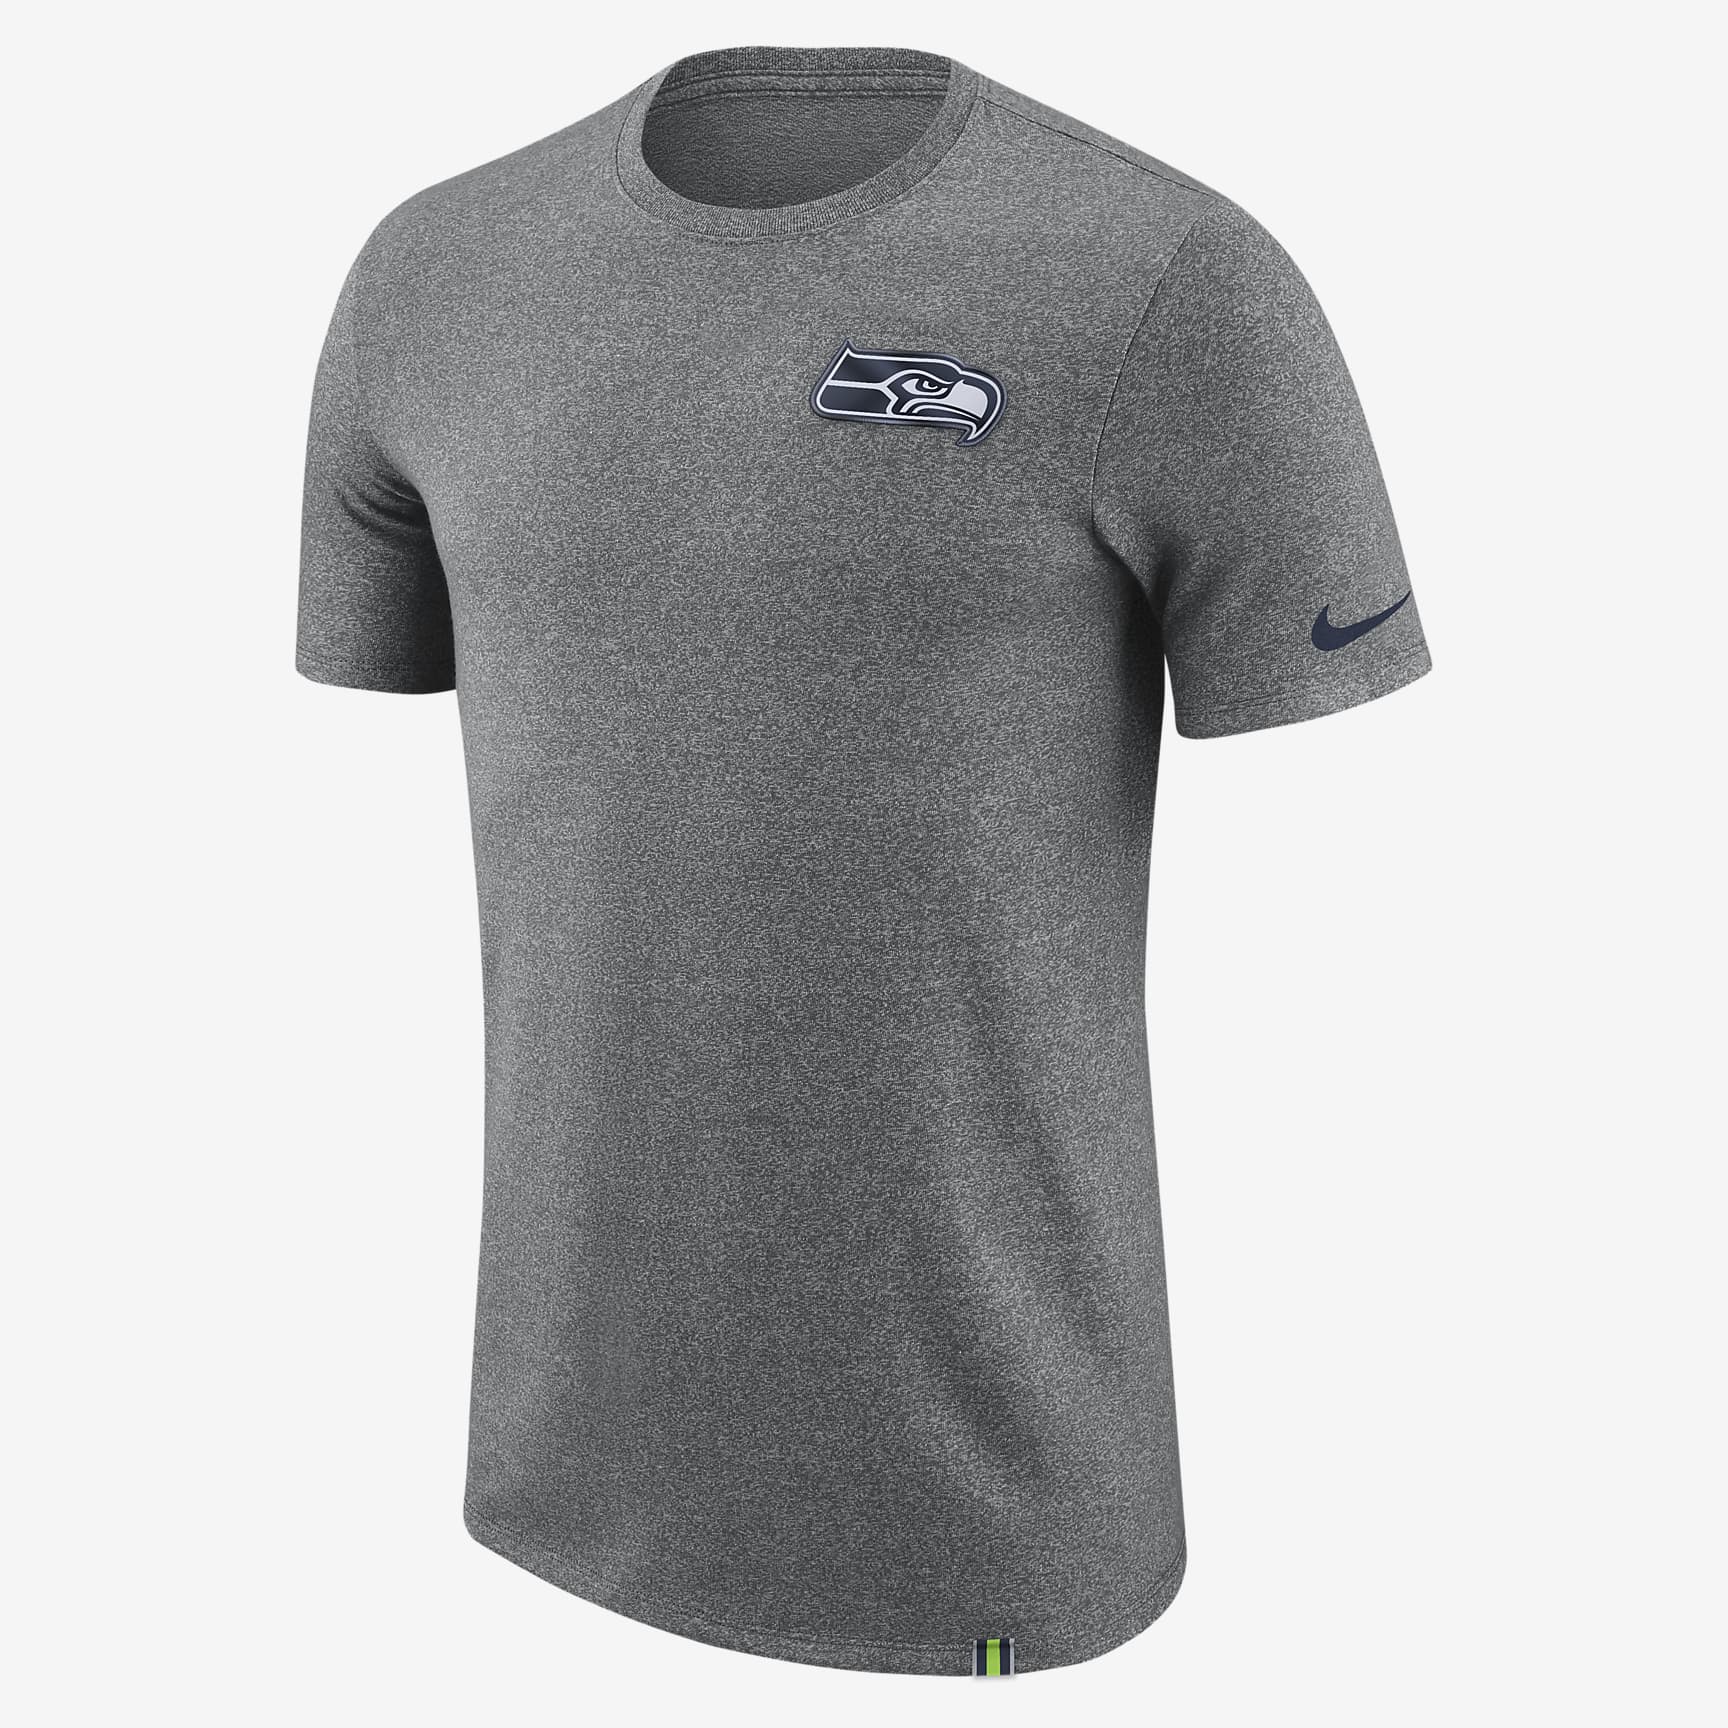 Nike Dry Marled Patch (NFL Seahawks) Men's T-Shirt. Nike IL